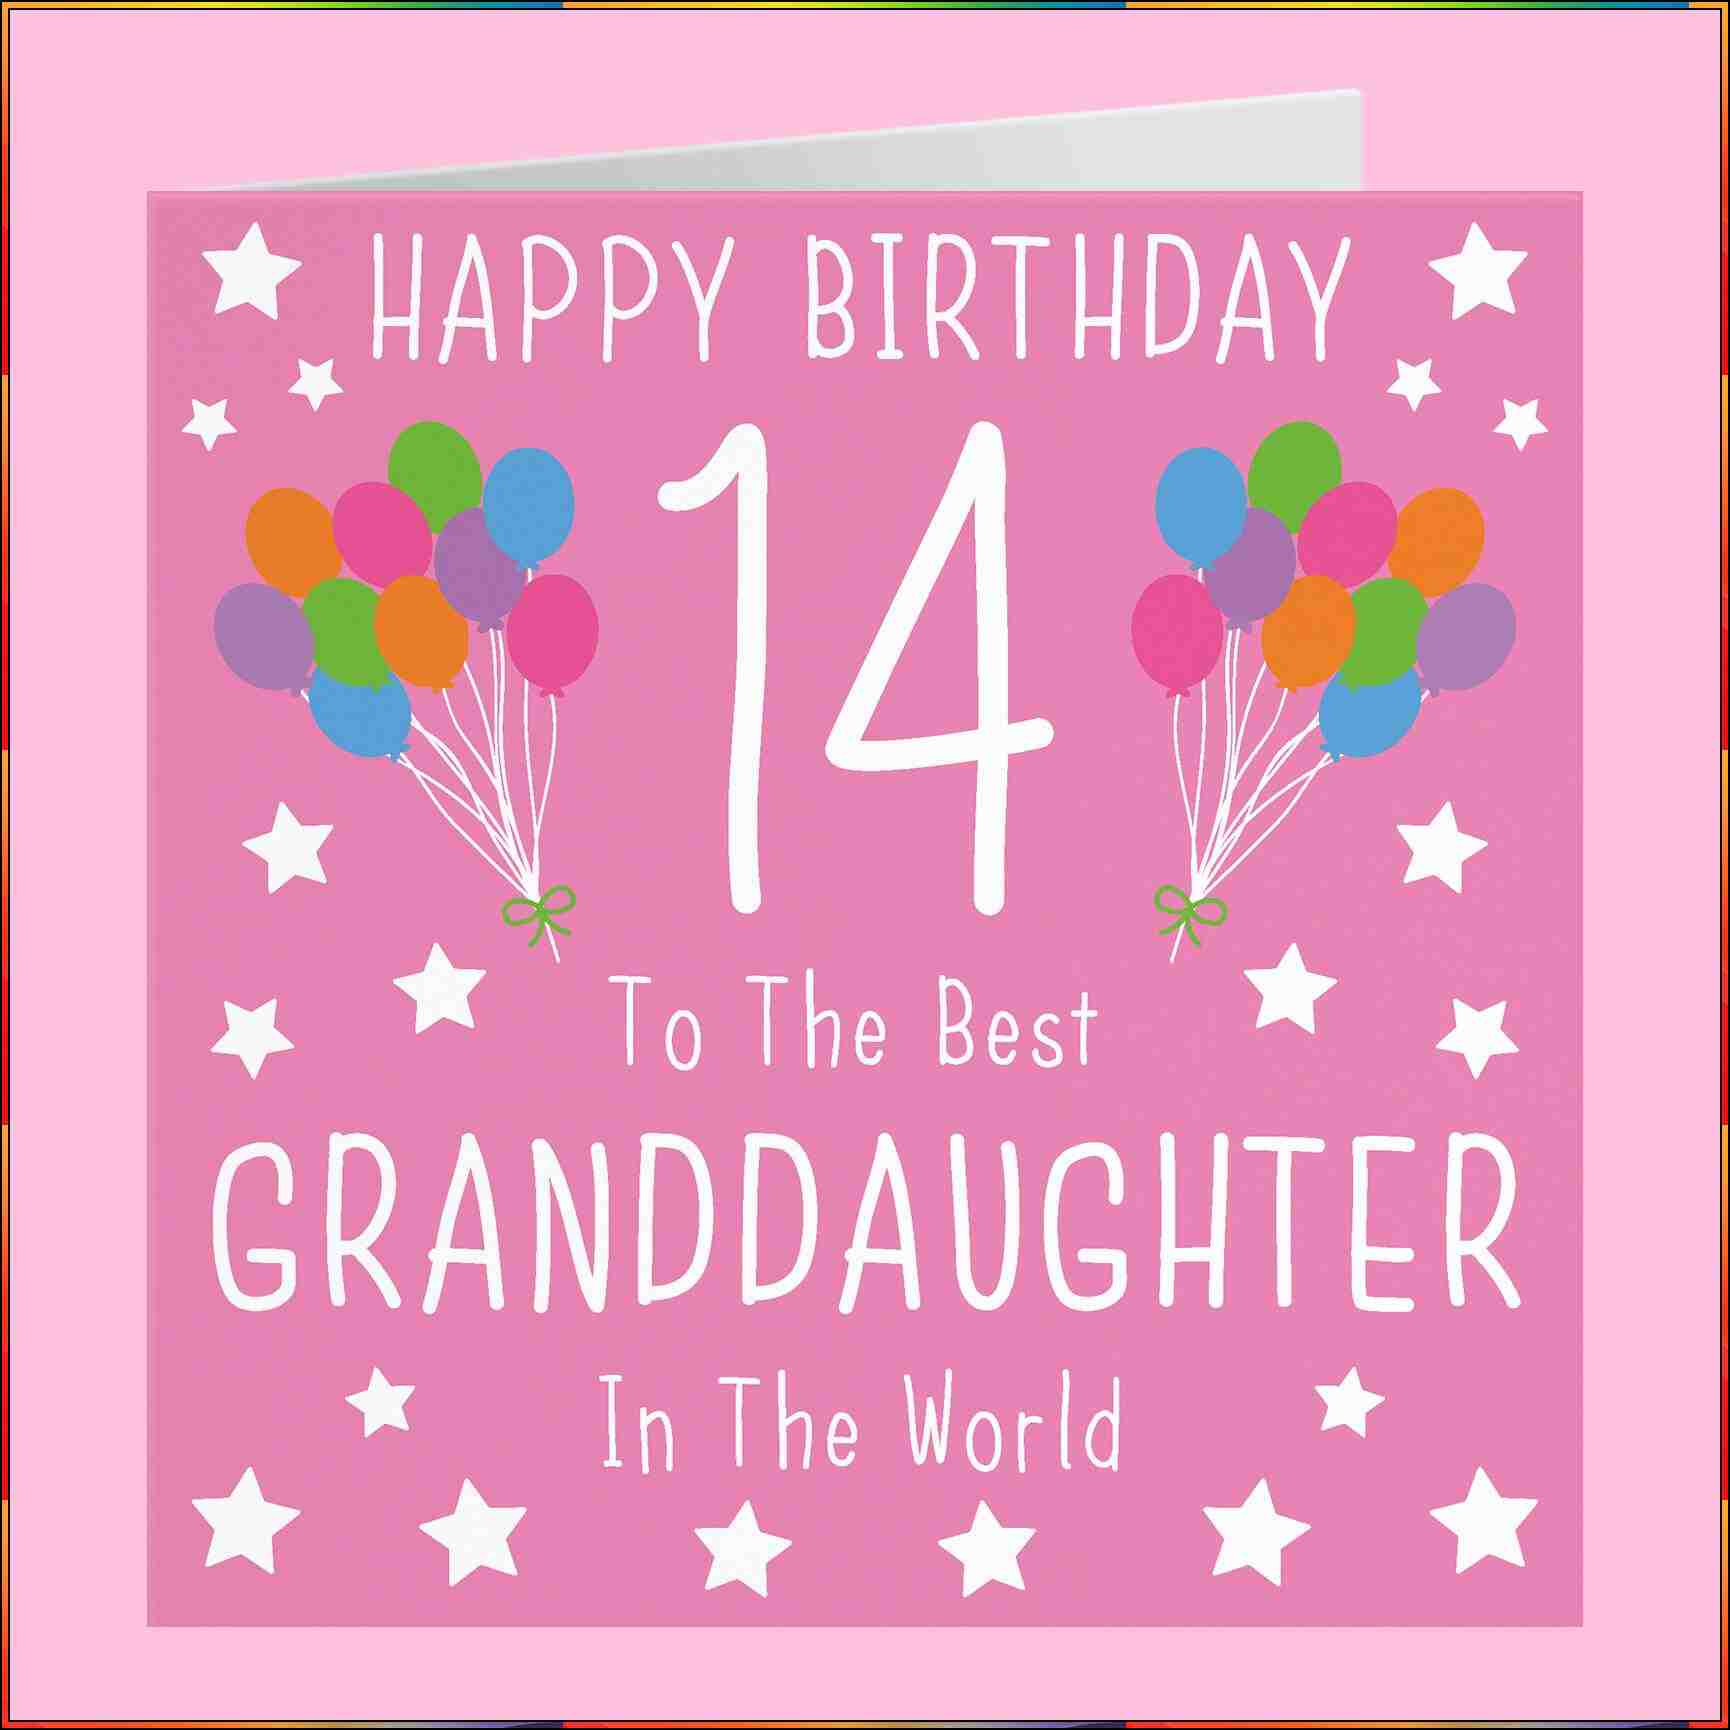 happy 14th birthday granddaughter images
